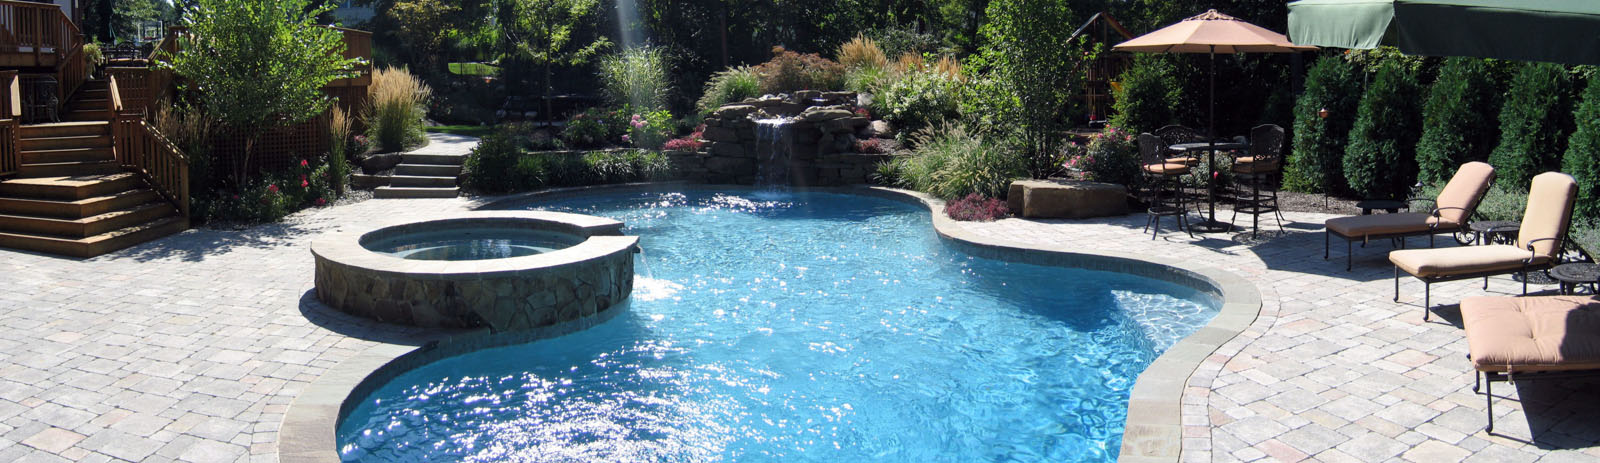 Deck, Pool, Spa, Waterfall, Landscaping - North Jersey